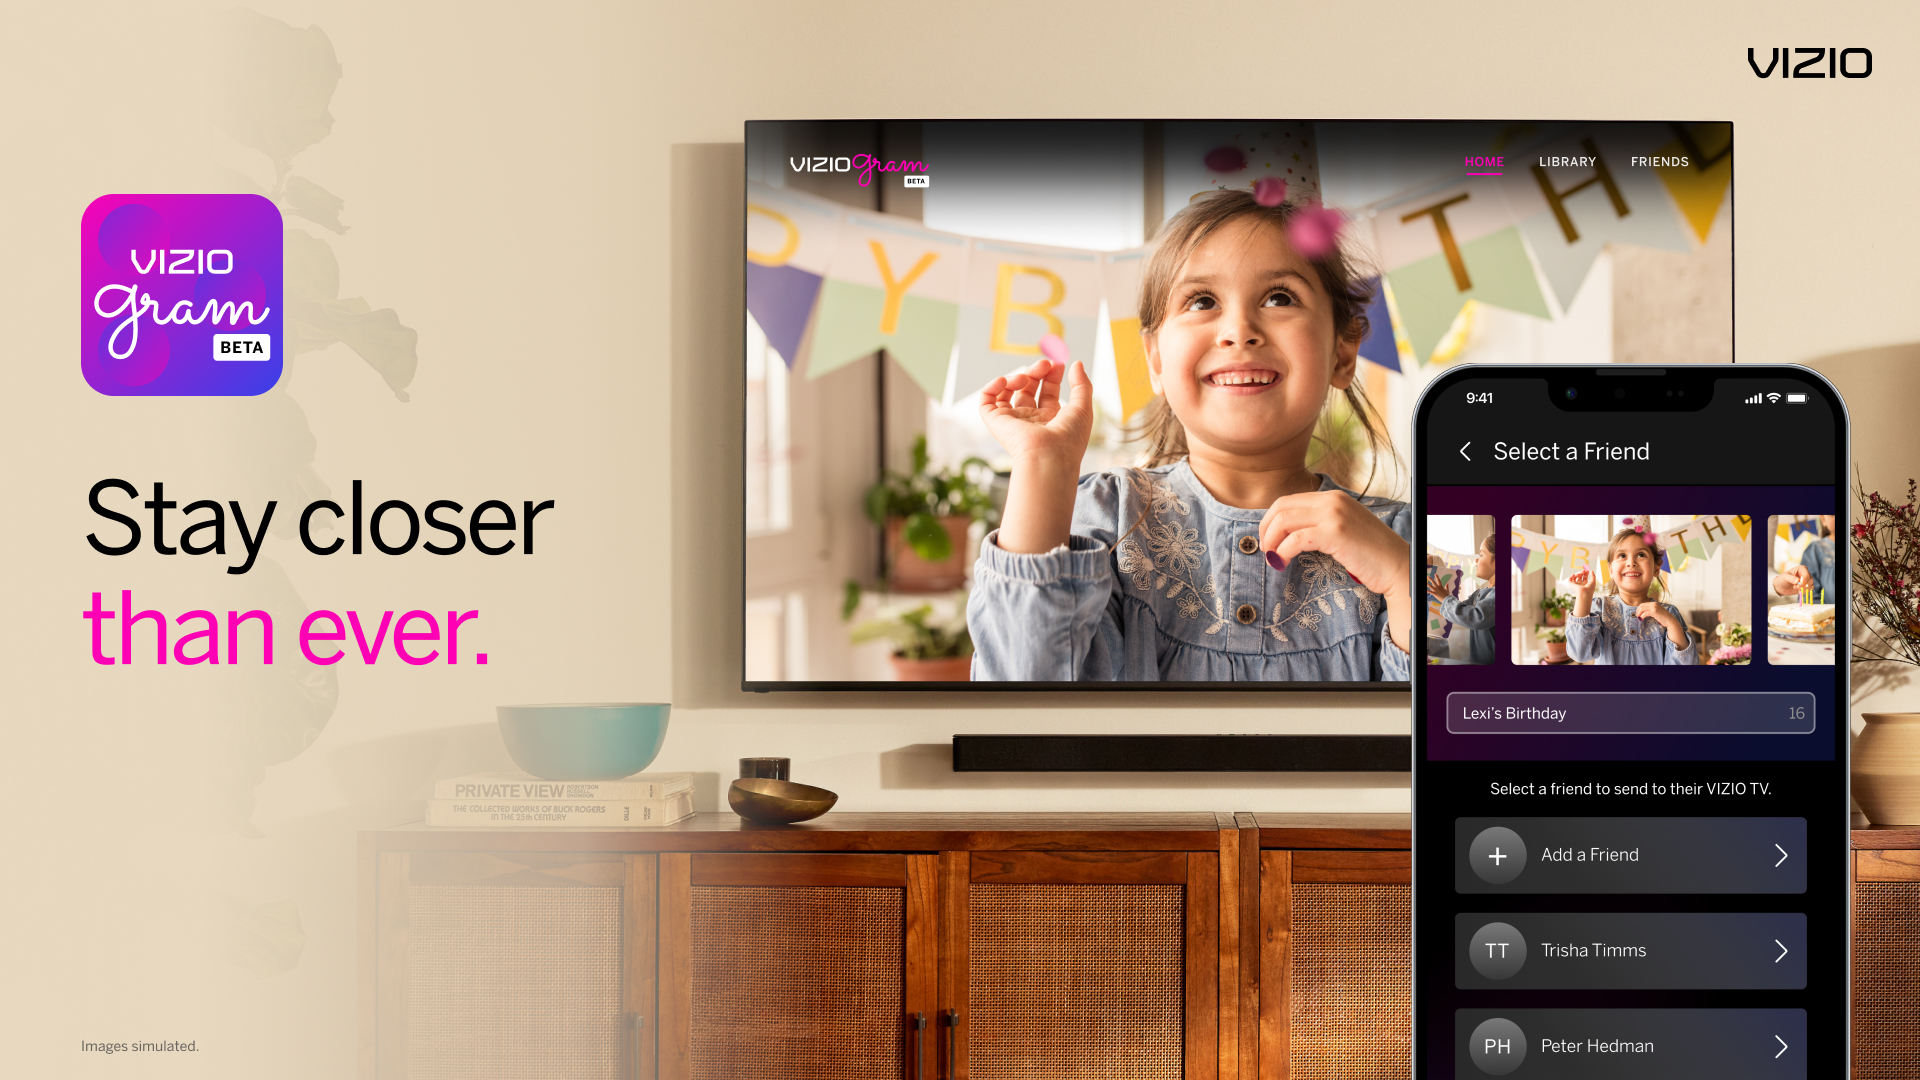 Vizio TV Owners Can Now Share Photos & Videos to Vizio TVs From Anywhere